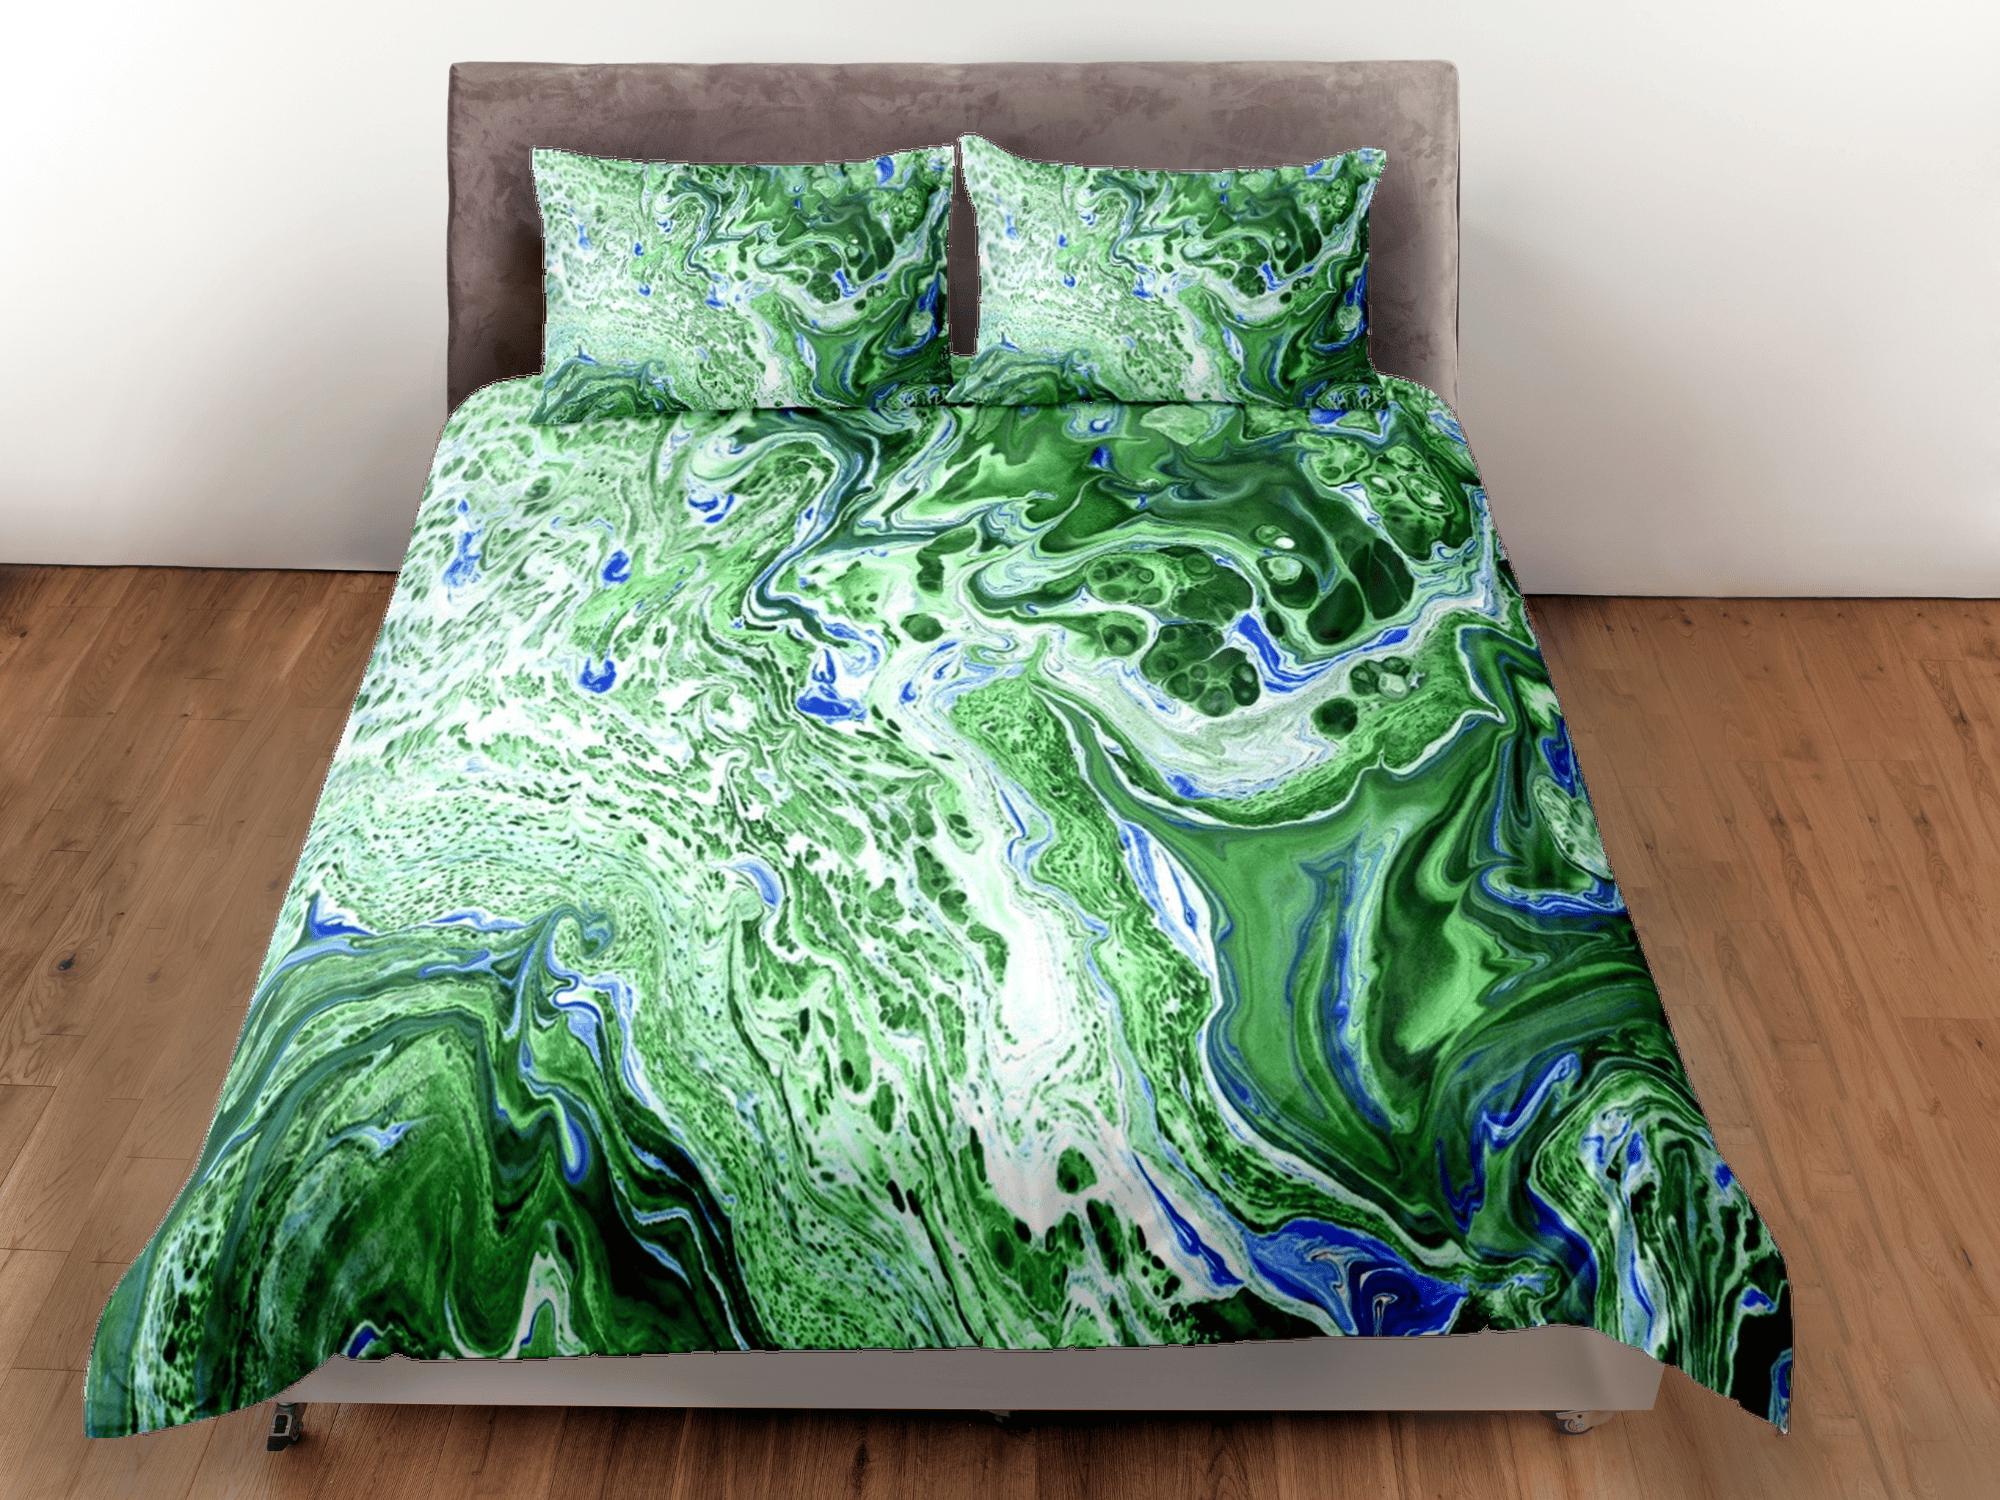 daintyduvet Contemporary bedroom set green aesthetic duvet cover, alcohol ink marble abstract art room decor boho chic bedding set full king queen